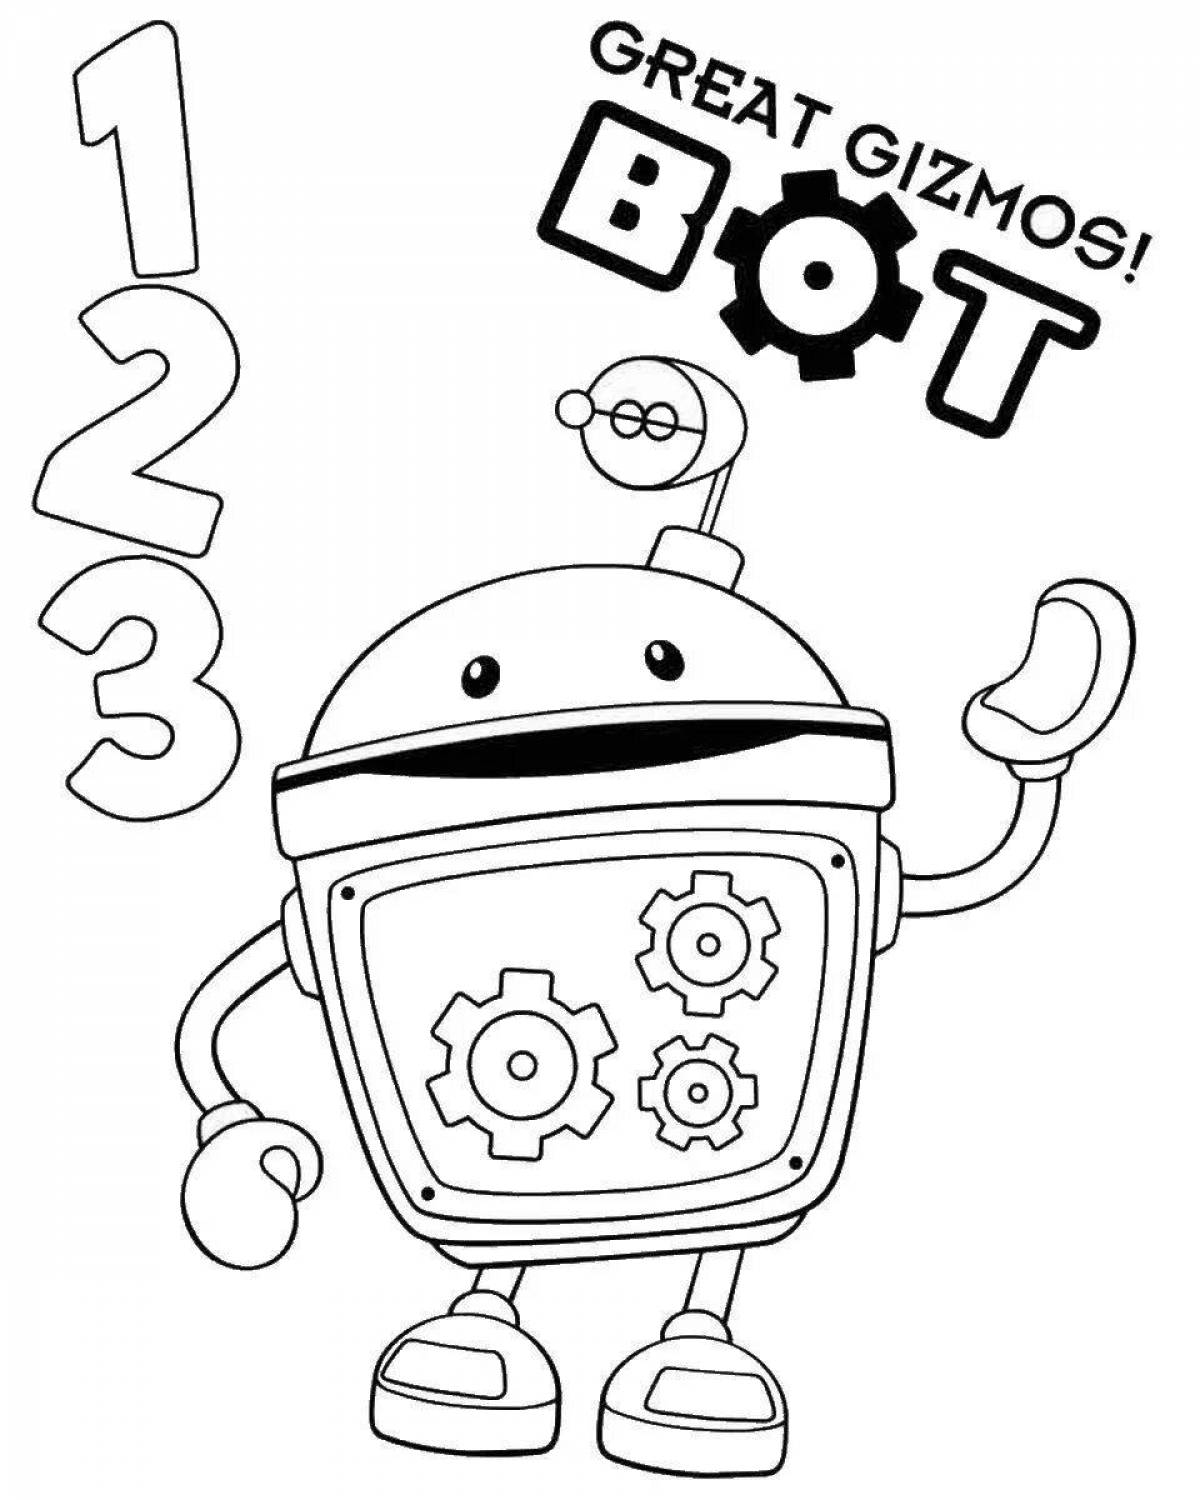 Joyful android coloring page